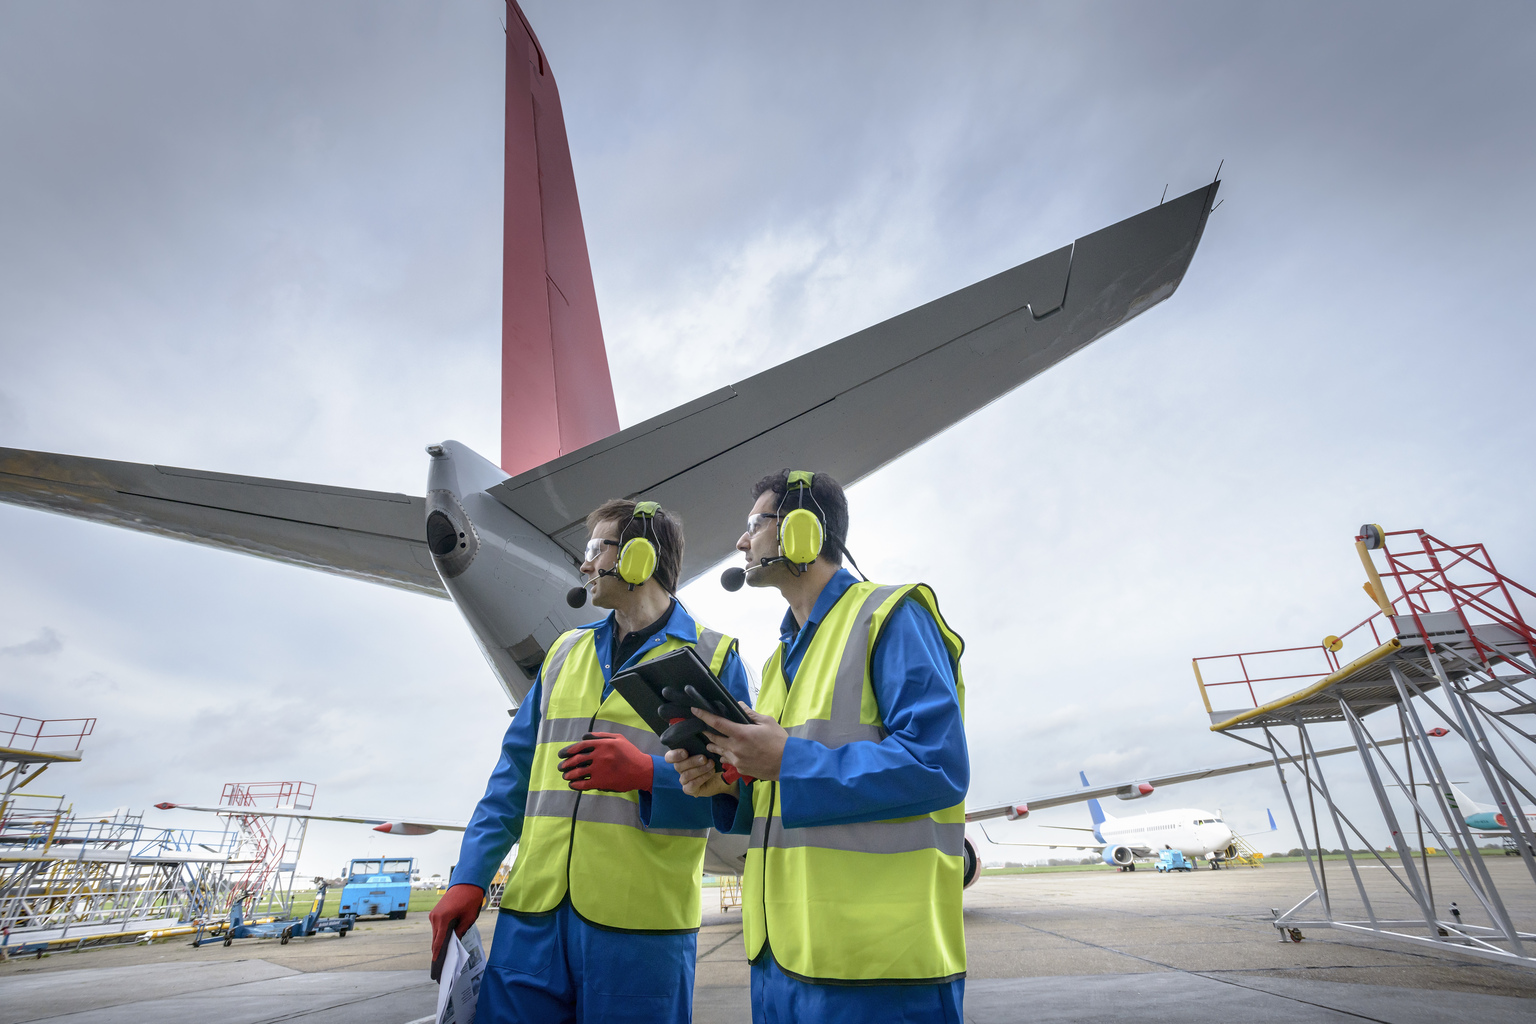 Airside engineers inspecting jet aircraft on runway